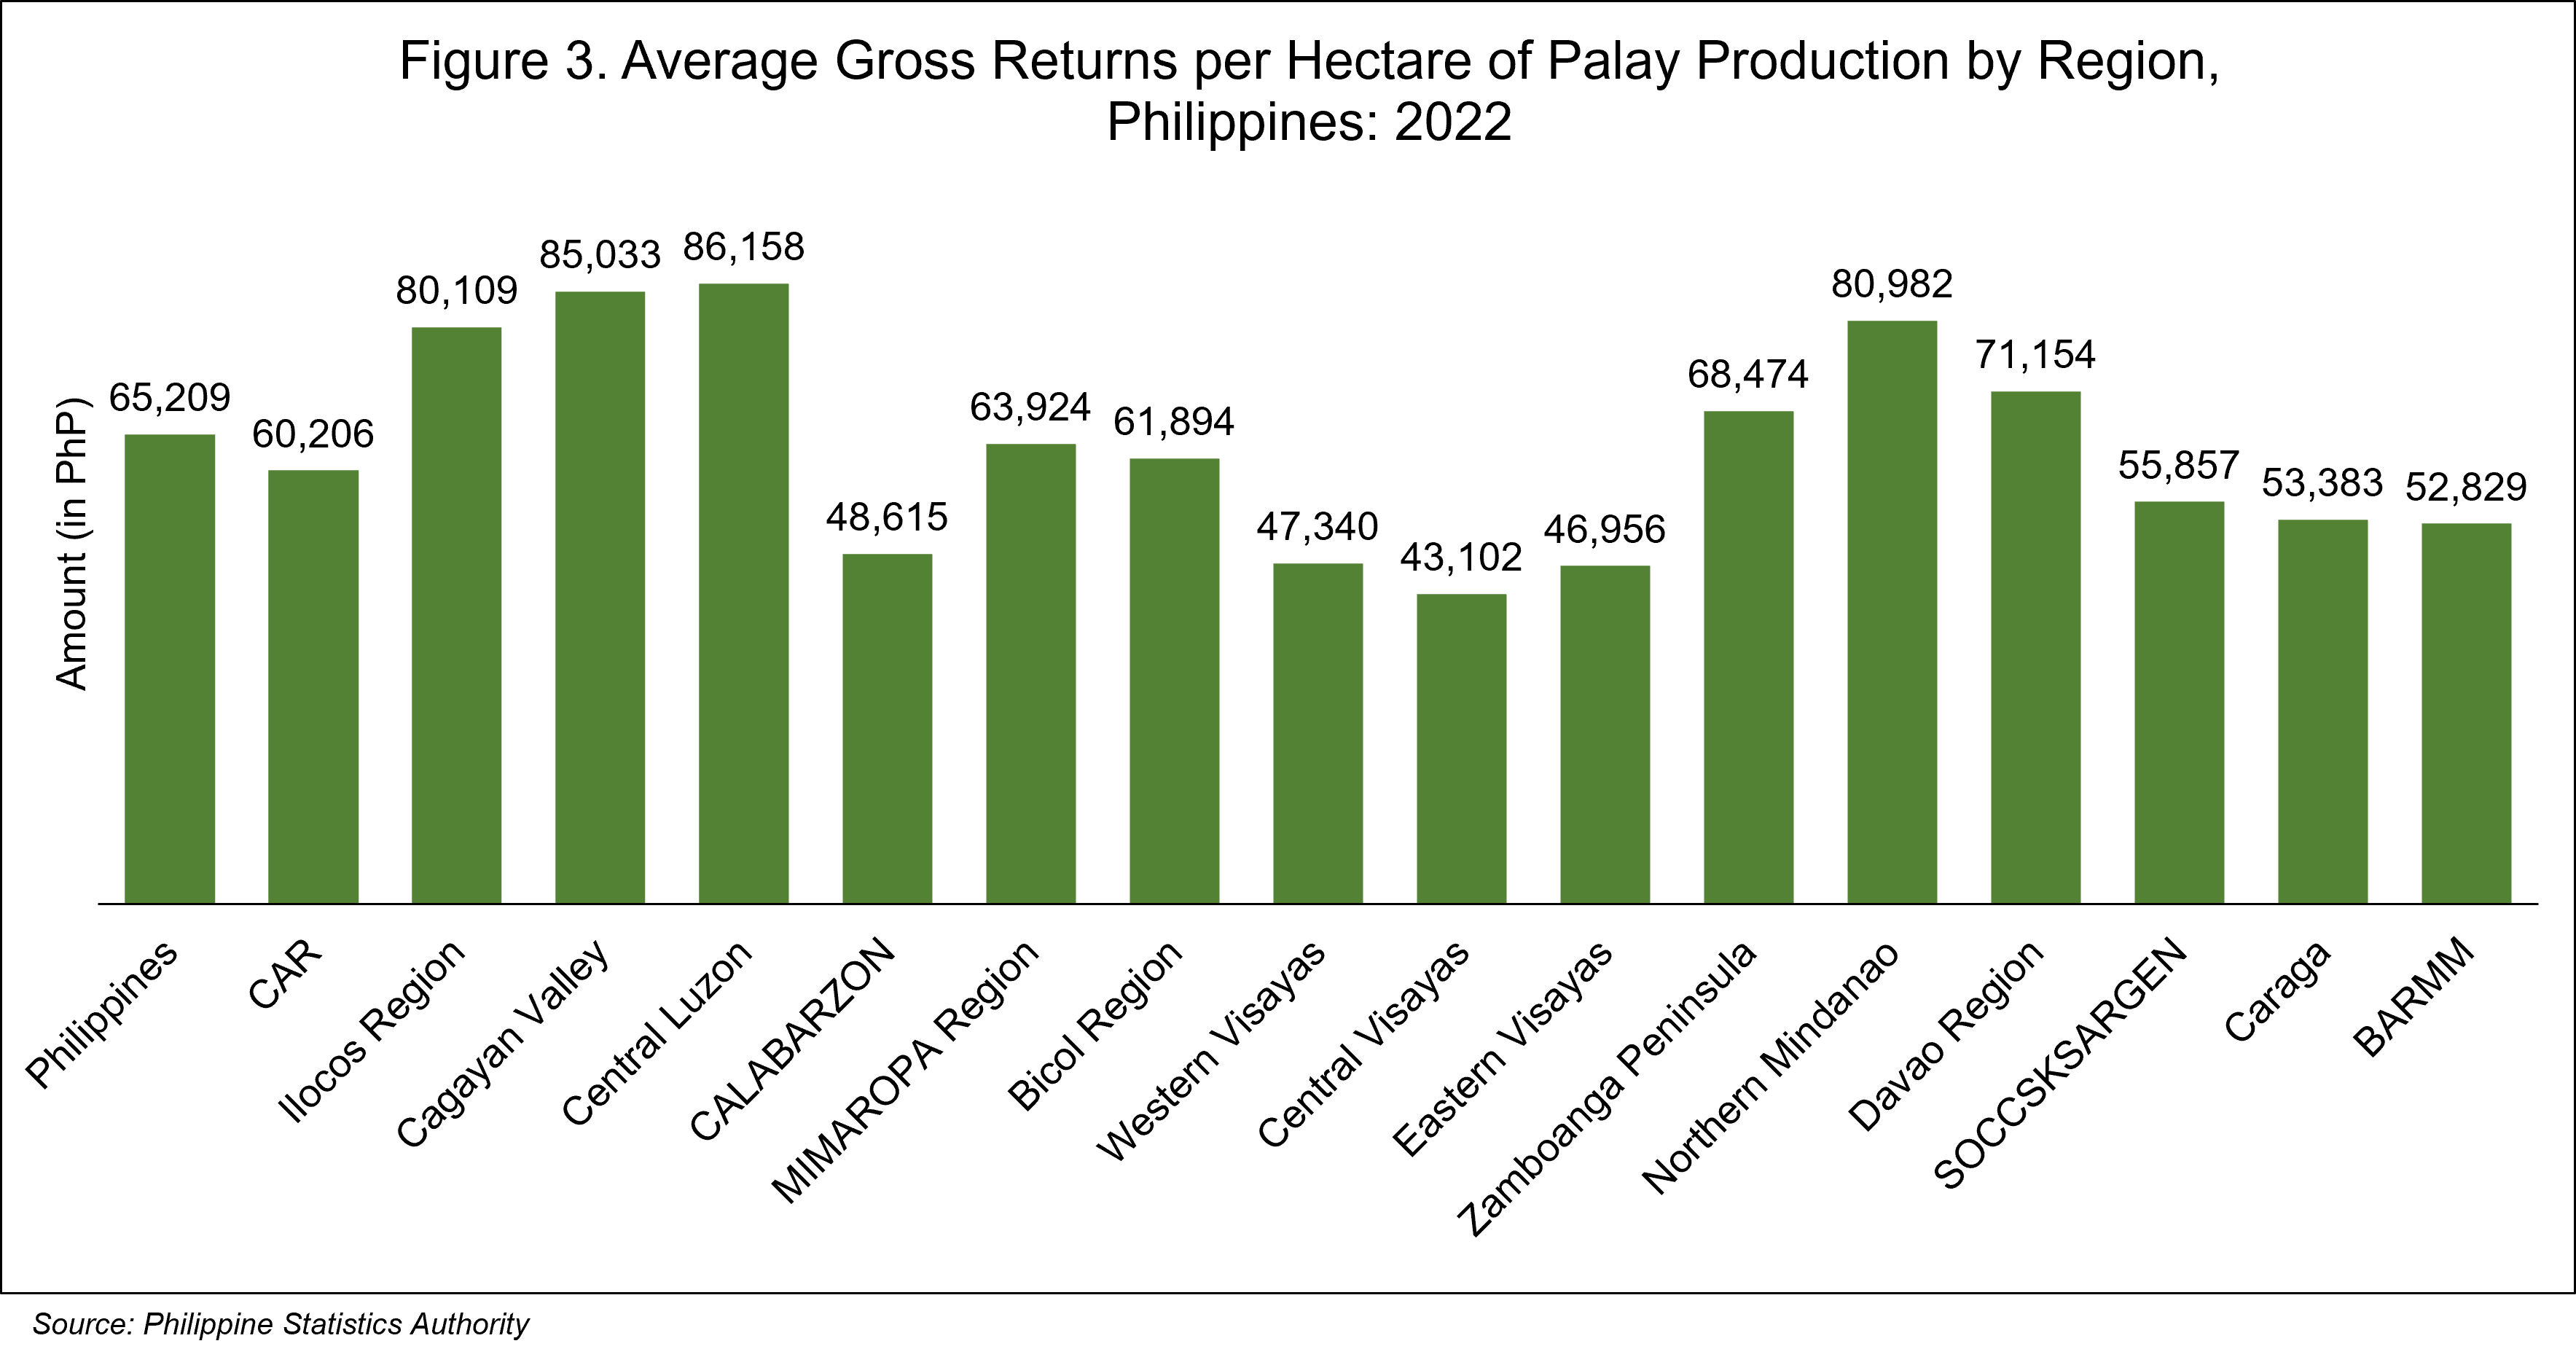 Average Gross Returns per Hectare of Palay Production by Region